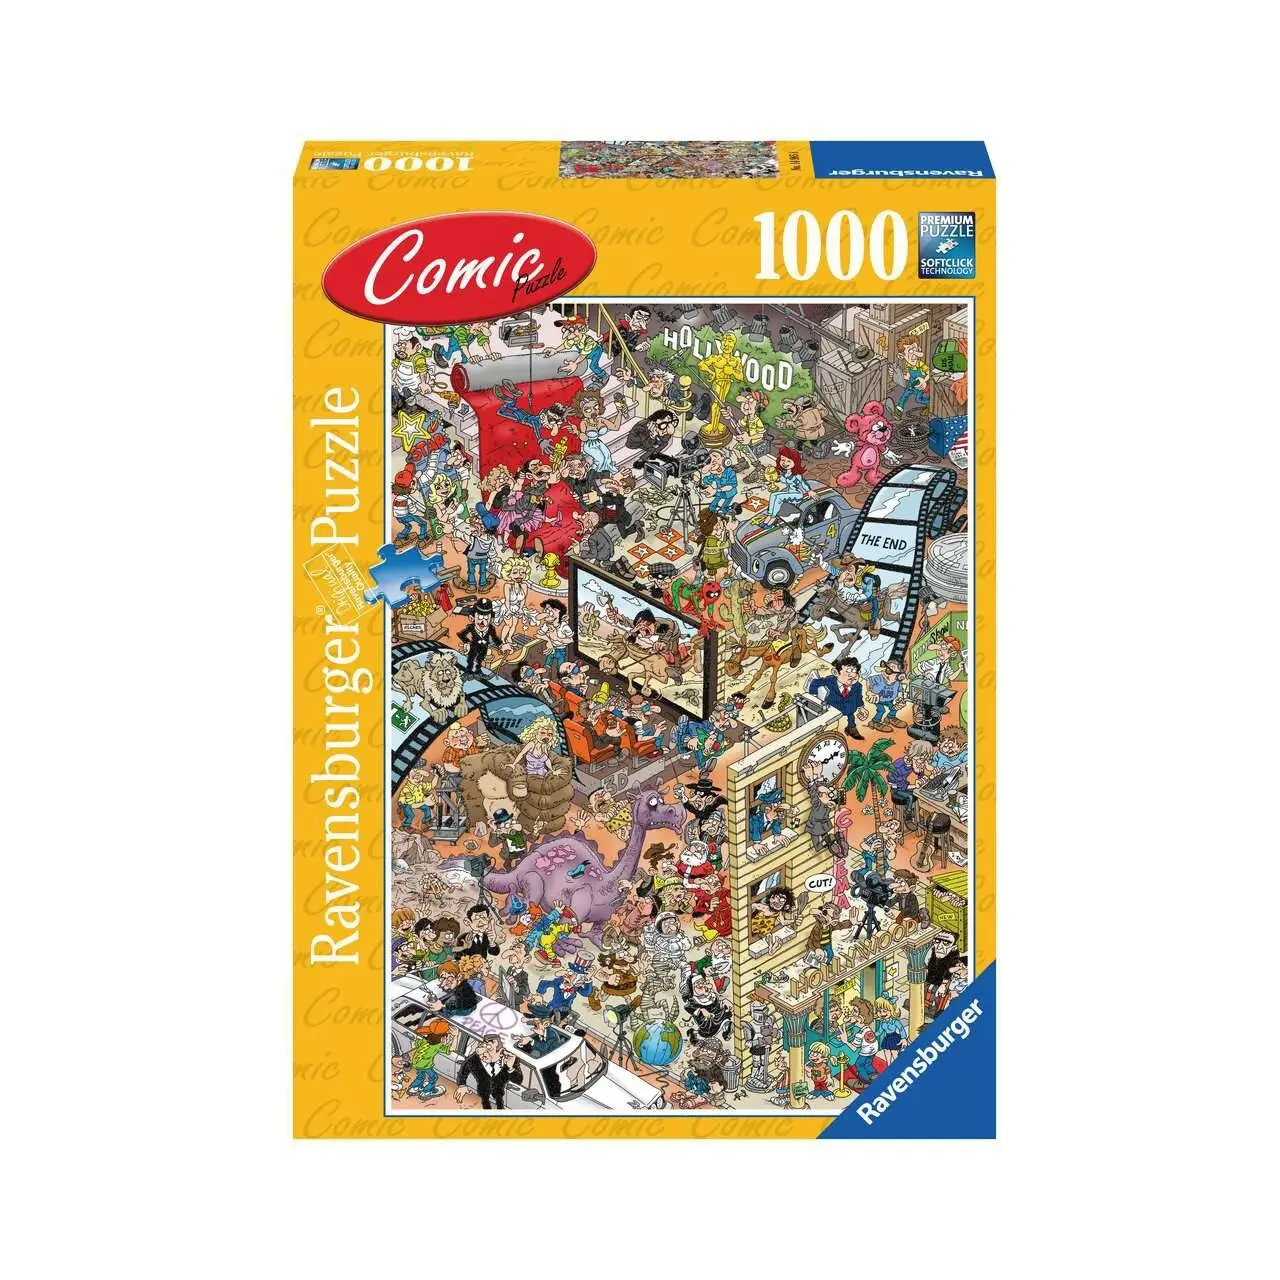 Hollywood Puzzle ComicPuzzle 1000